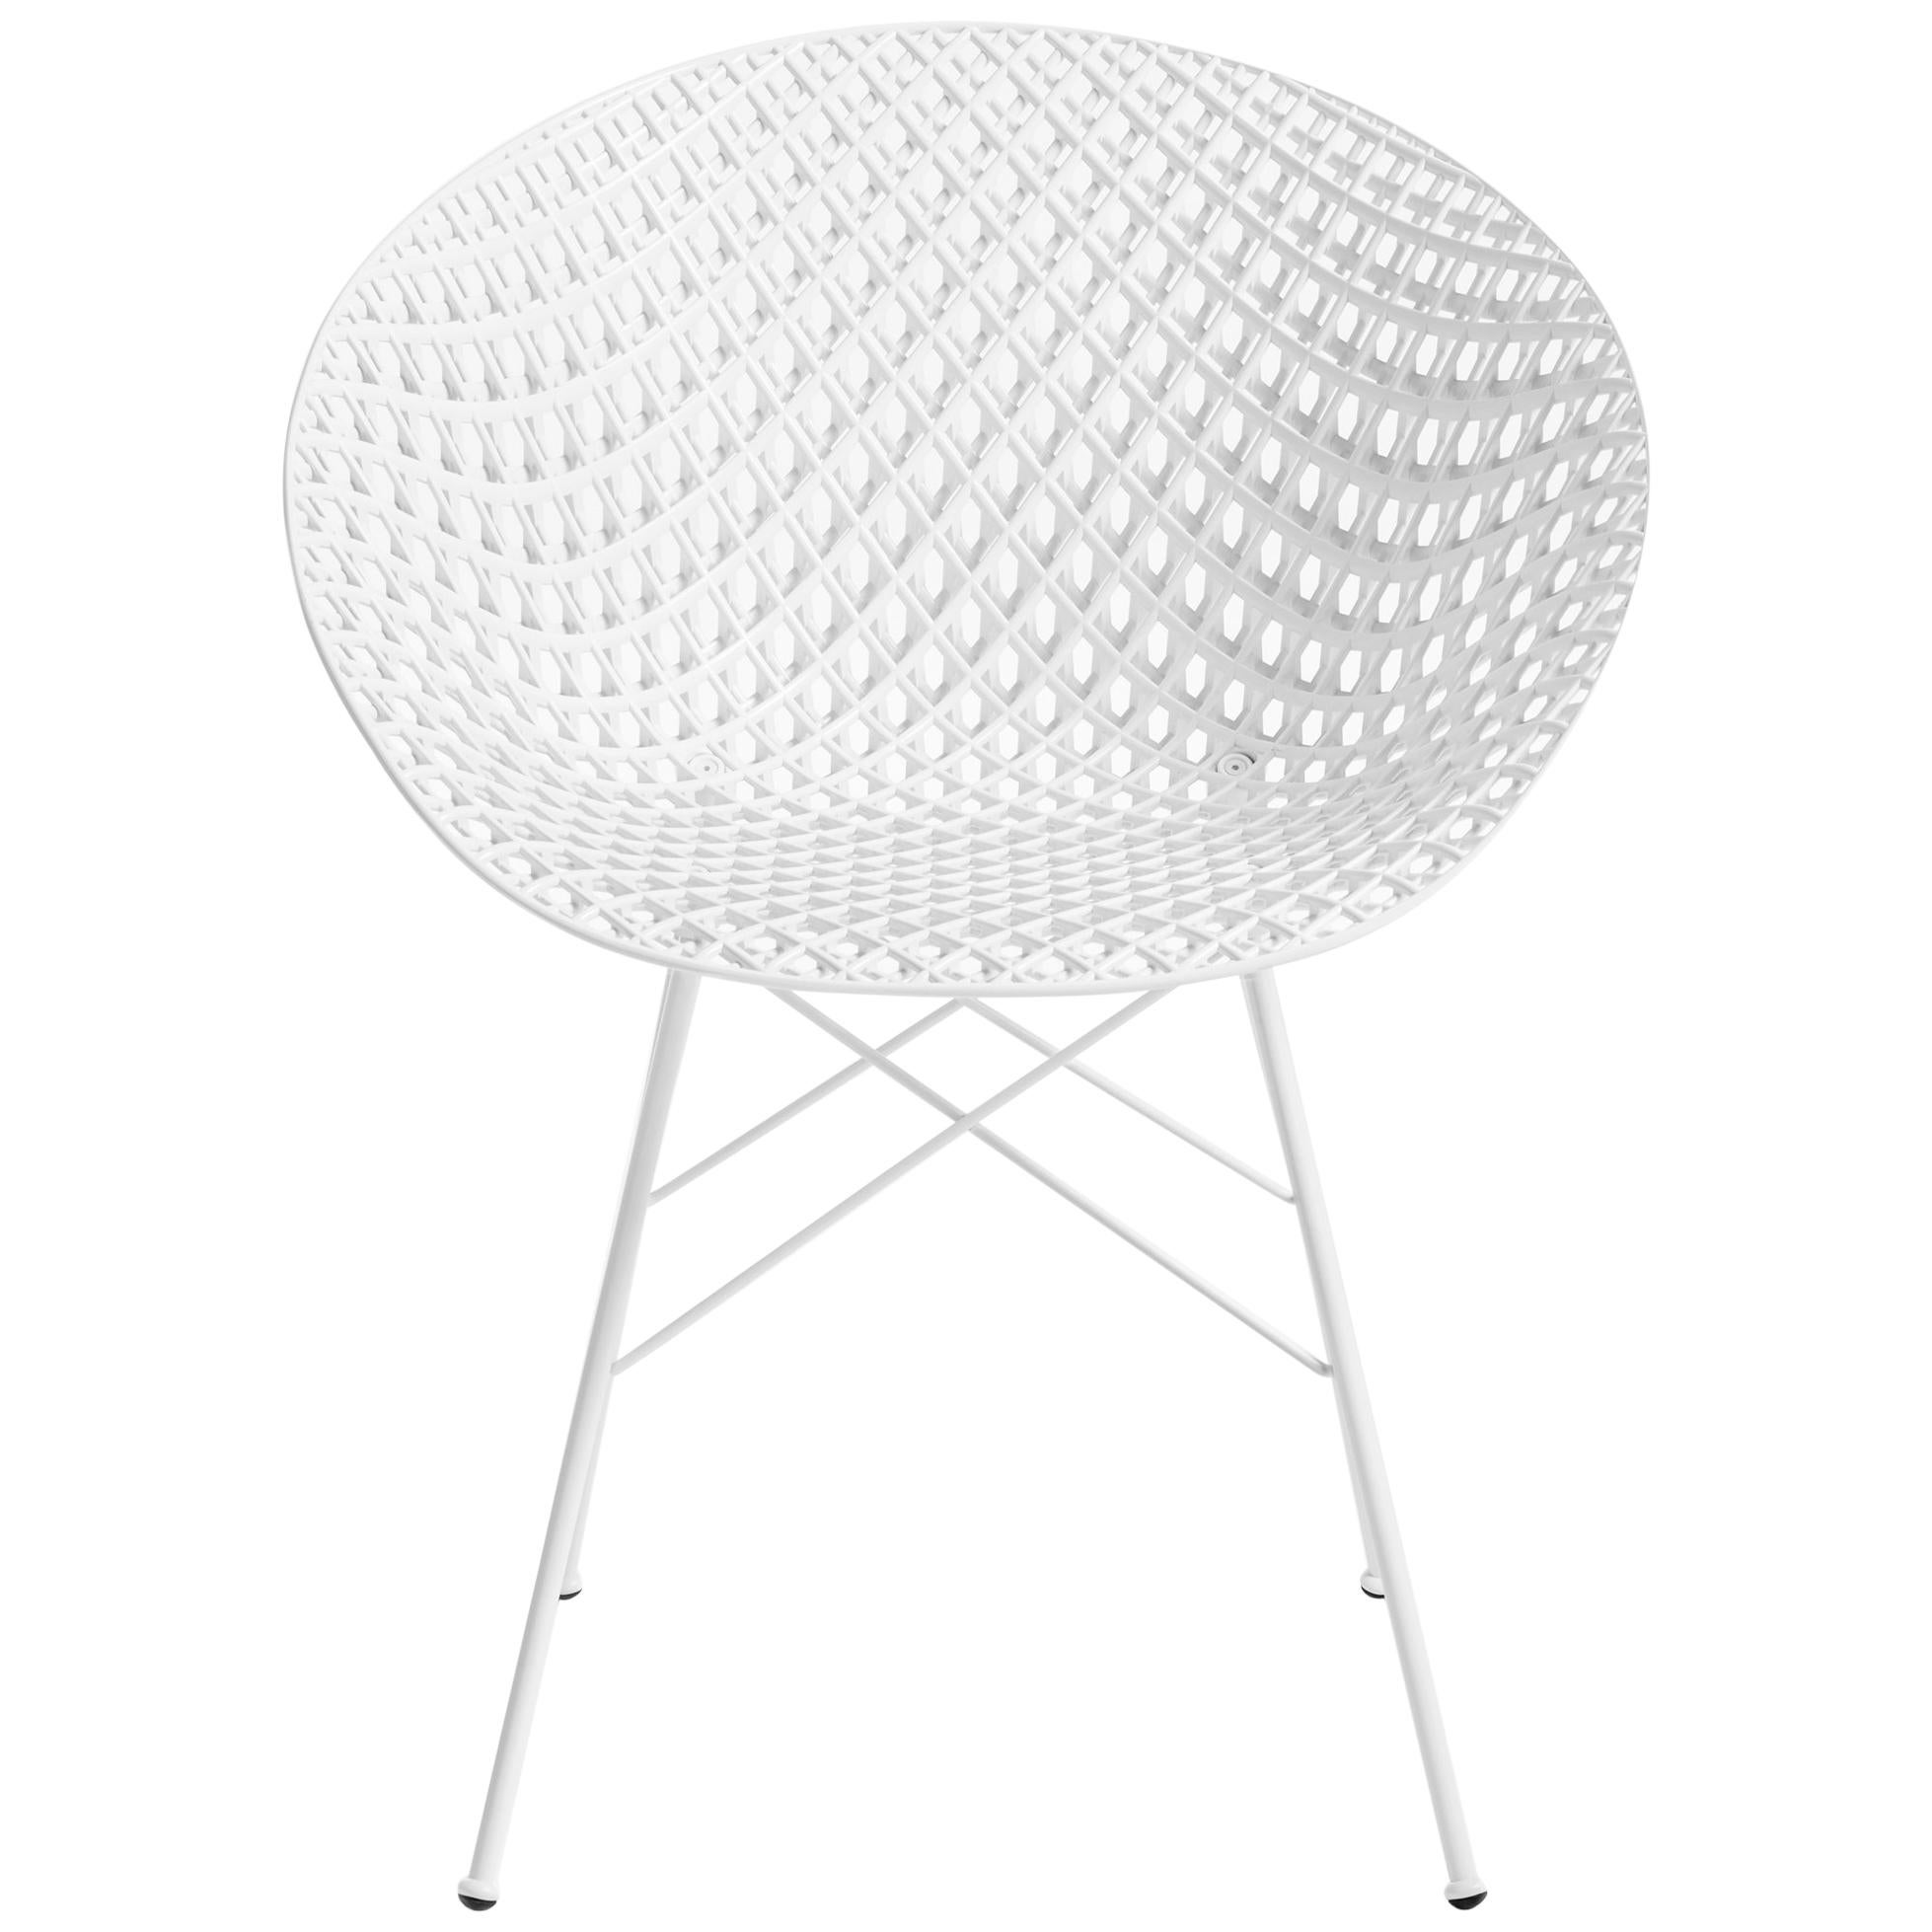 Set of 2 Kartell Smatrik Chair in White with White Legs by Tokujin Yoshioka For Sale